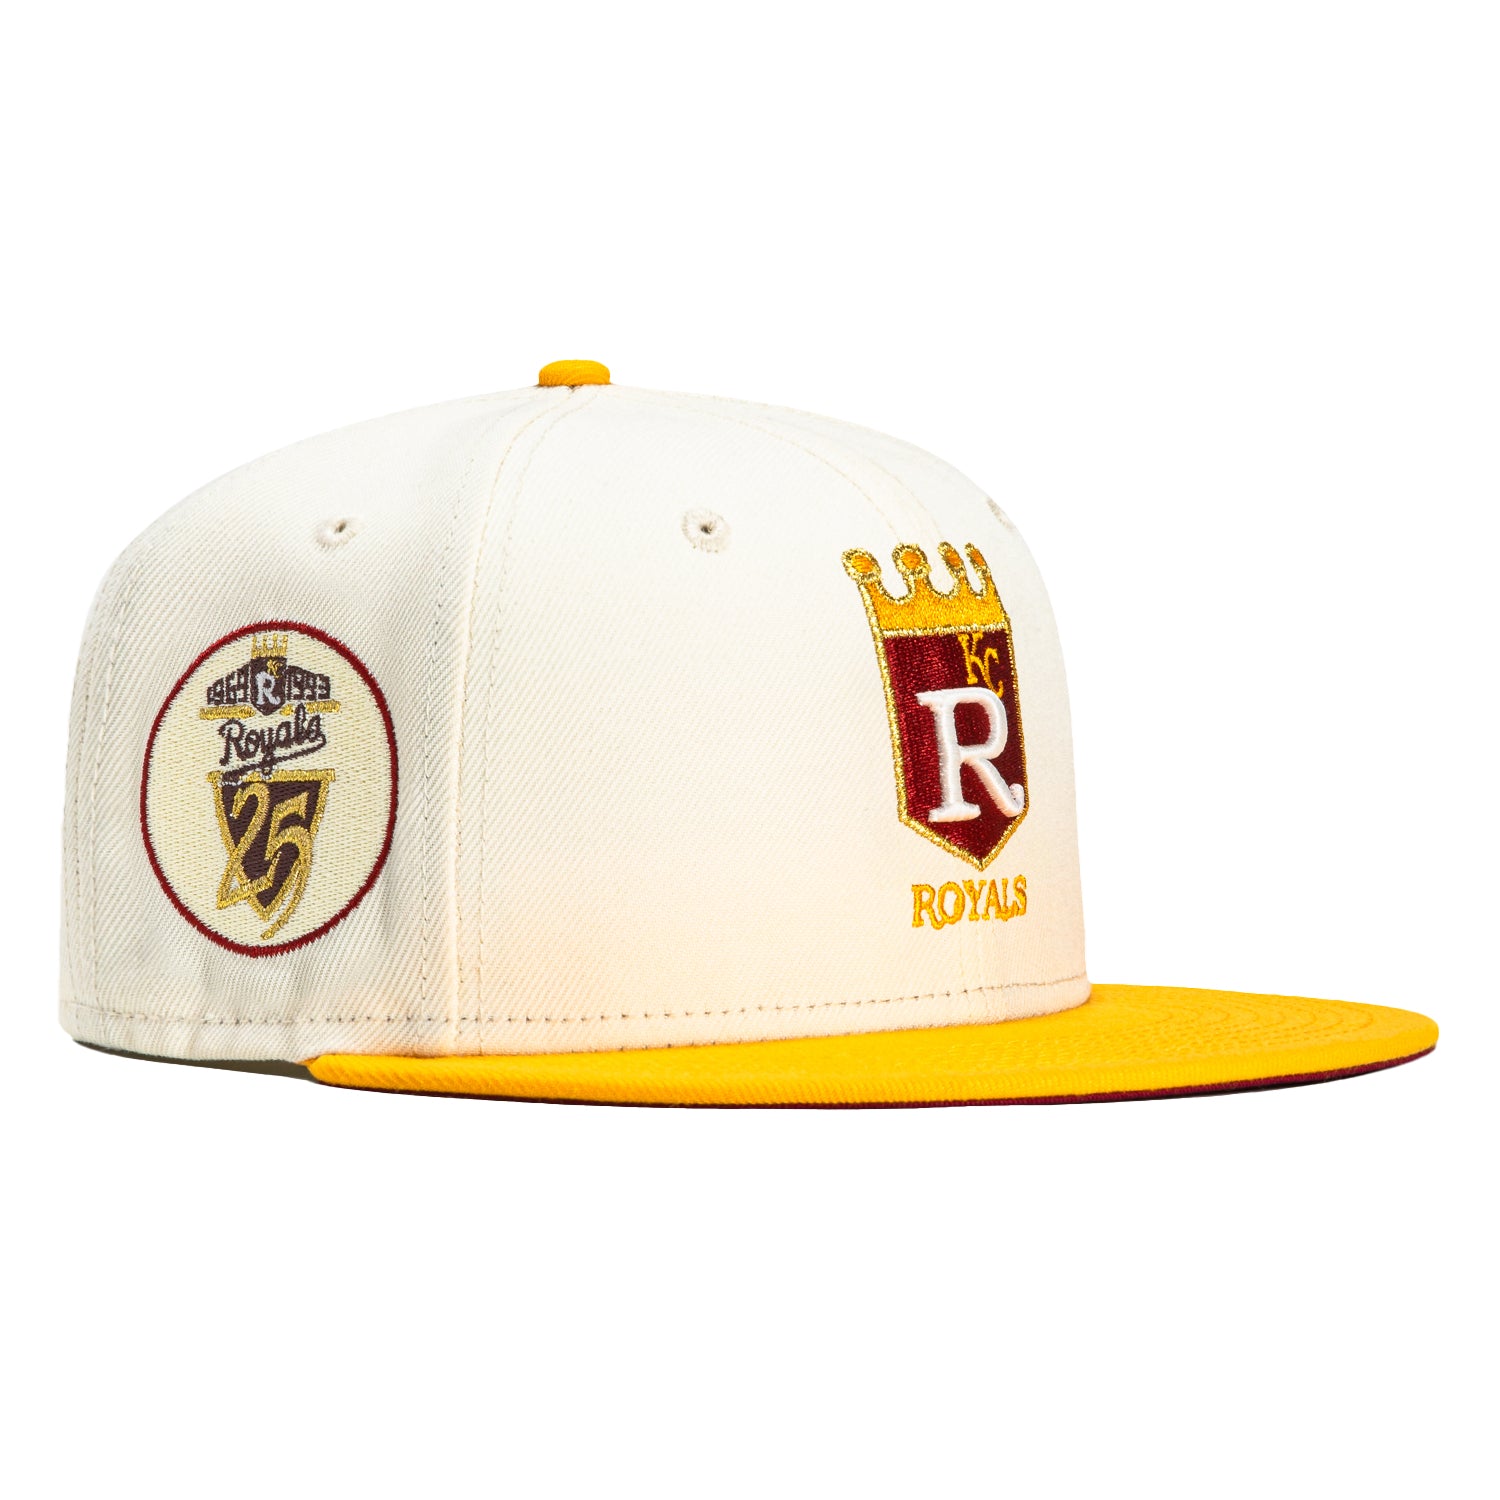 New Era 59FIFTY Peaches and Cream Kansas City Royals 25th Anniversary Patch Hat - White, Gold White/Gold / 7 7/8